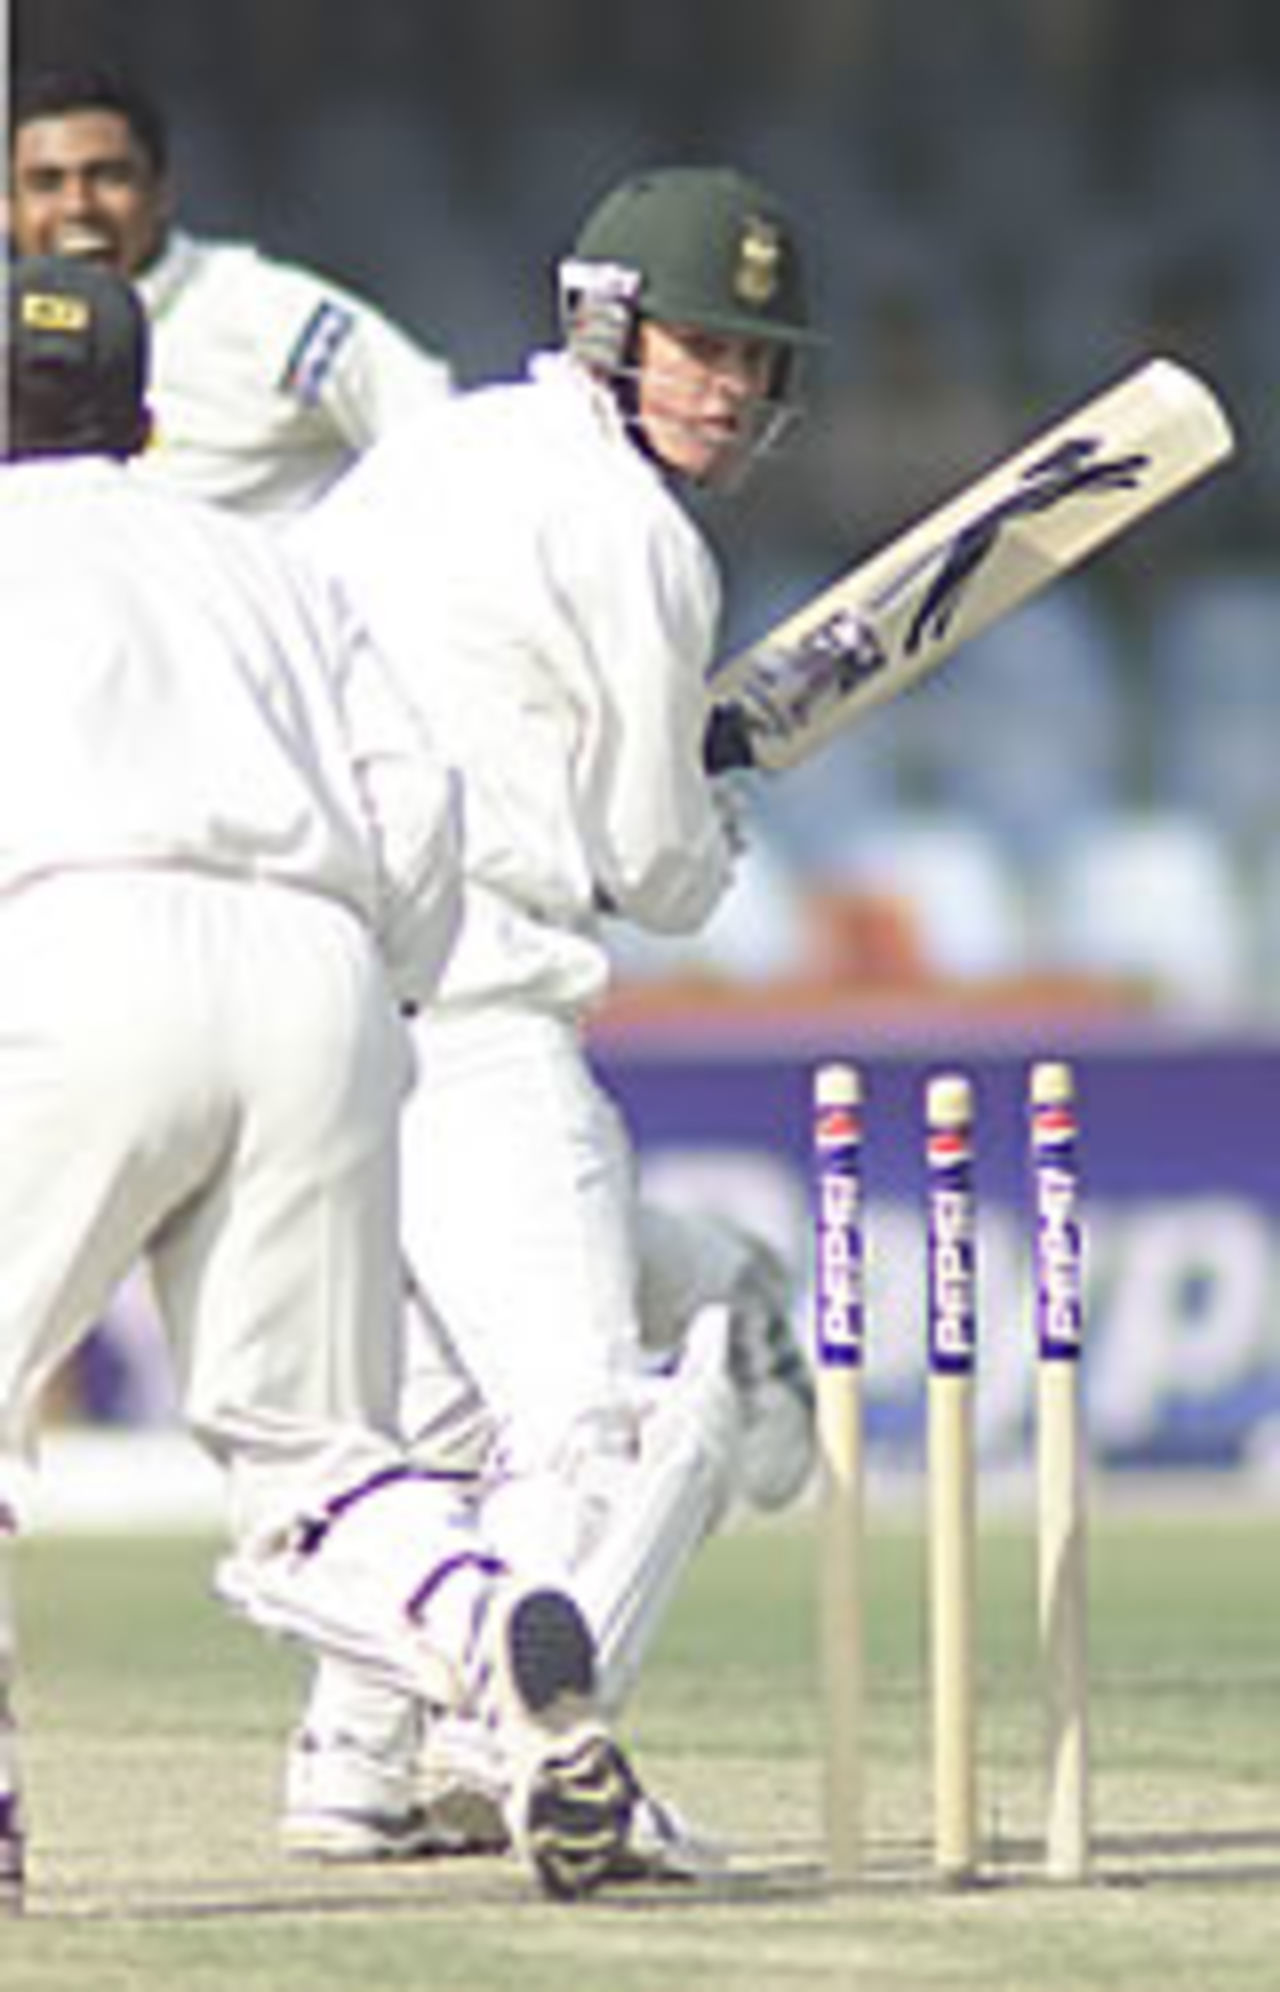 Shaun Pollock bowled by a Danish Kaneria (5-46) googly, Pakistan v South Africa, Day 4, 1st Test, Lahore, October 20, 2003.